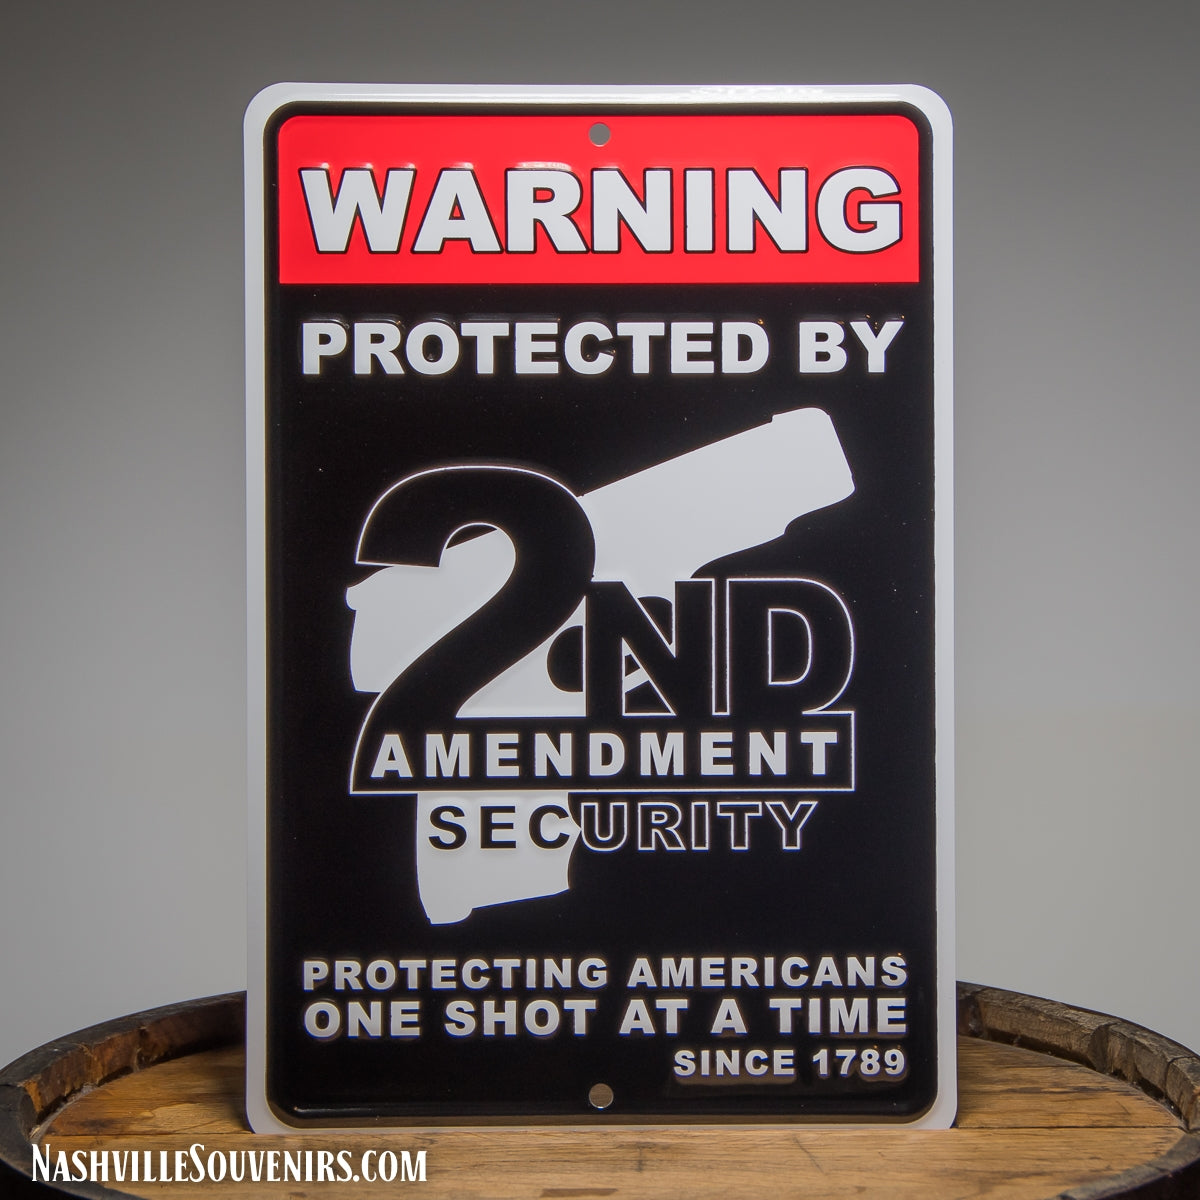 Warning Protected by 2nd Amendment Security since 1789